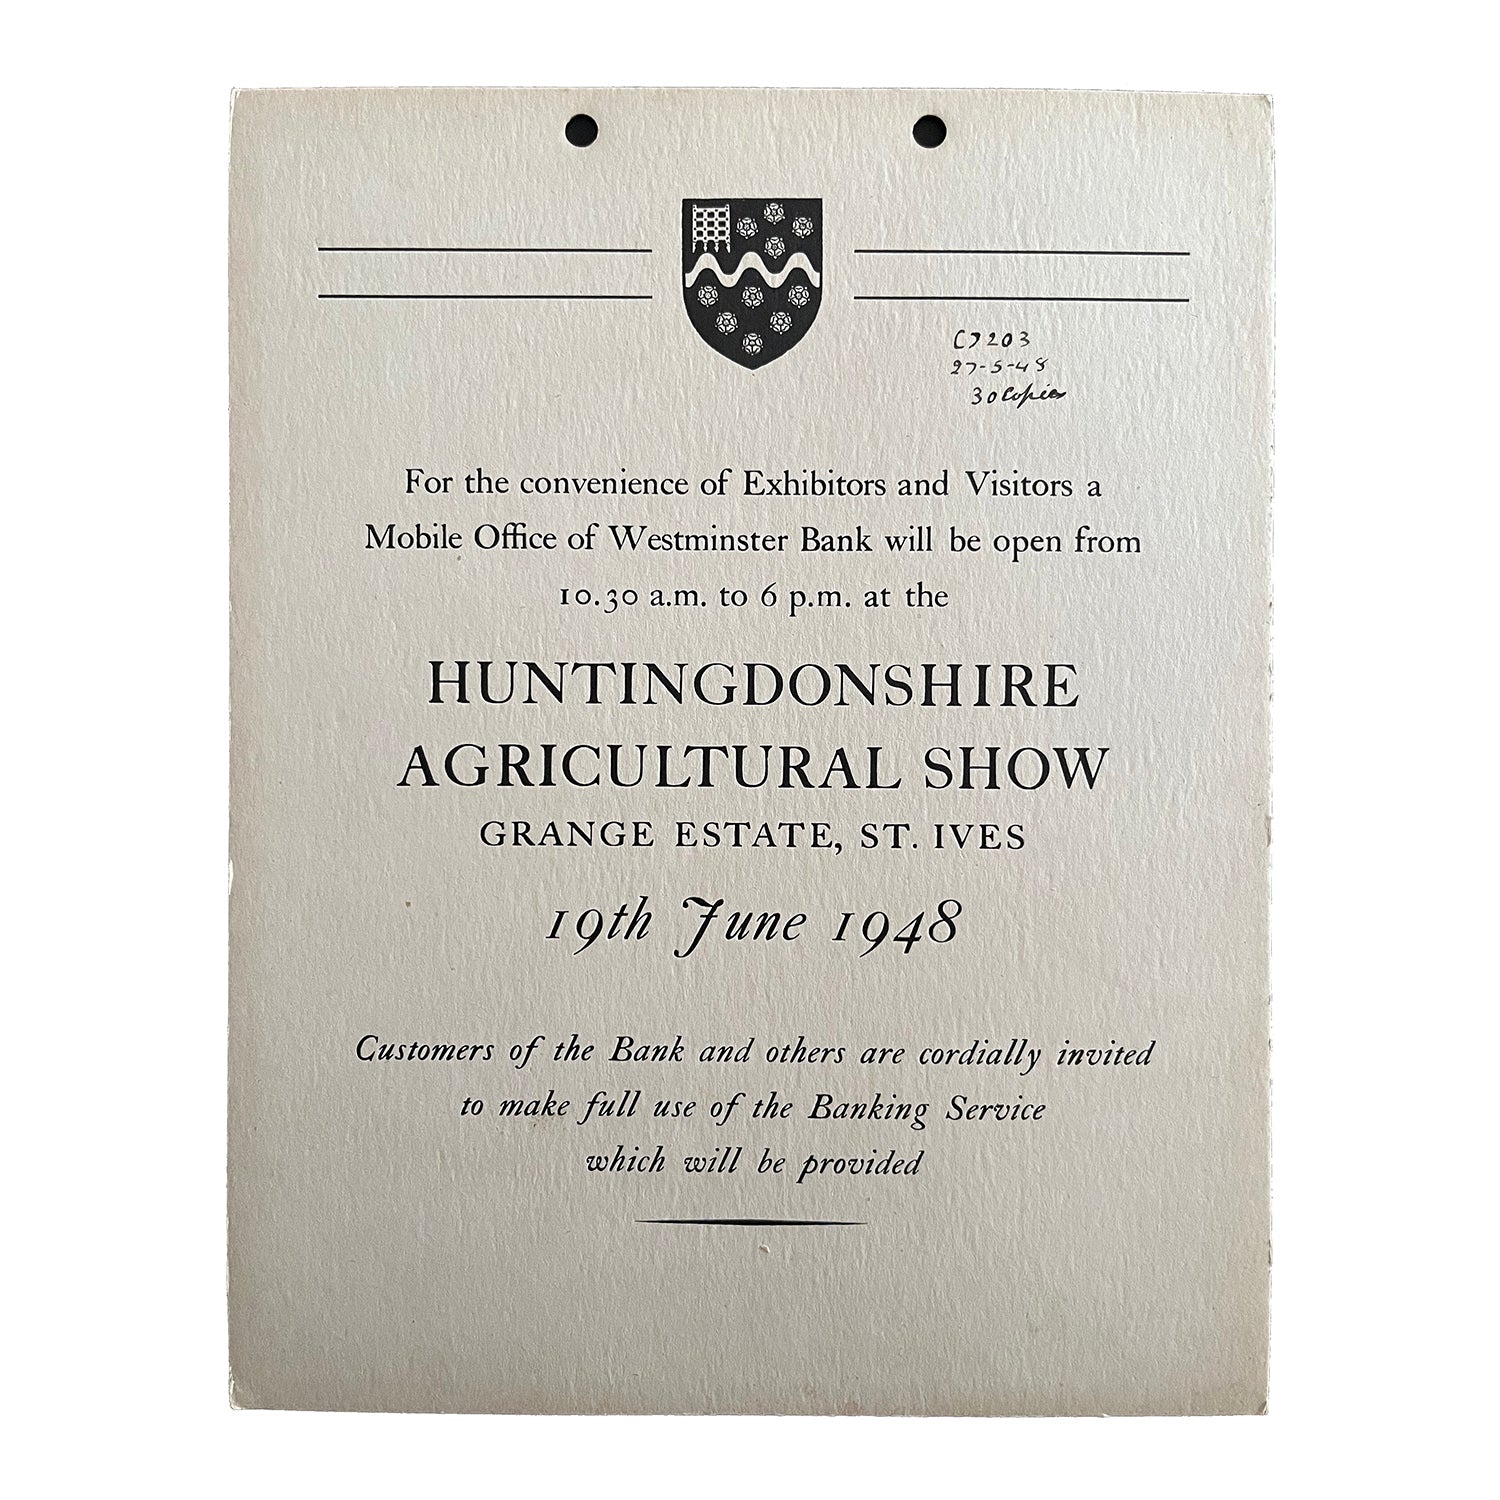 hanging card exhibitor notice published by the Westminster Bank for display at the Huntingdonshire Agricultural Show, 1948